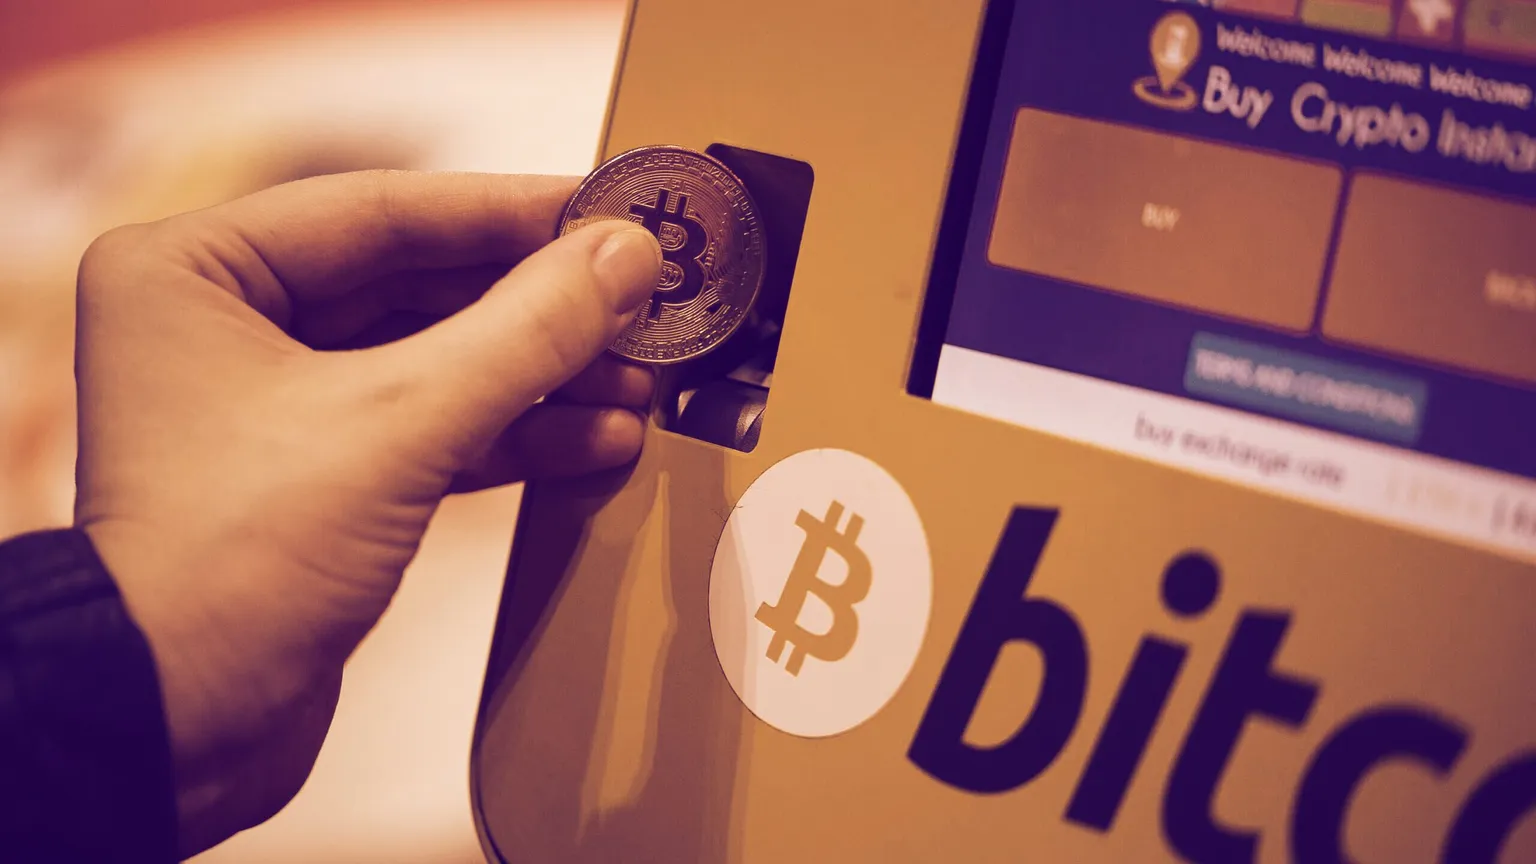 More than 1,713 Bitcoin ATMs have been installed since January 2020. Image: Shutterstock